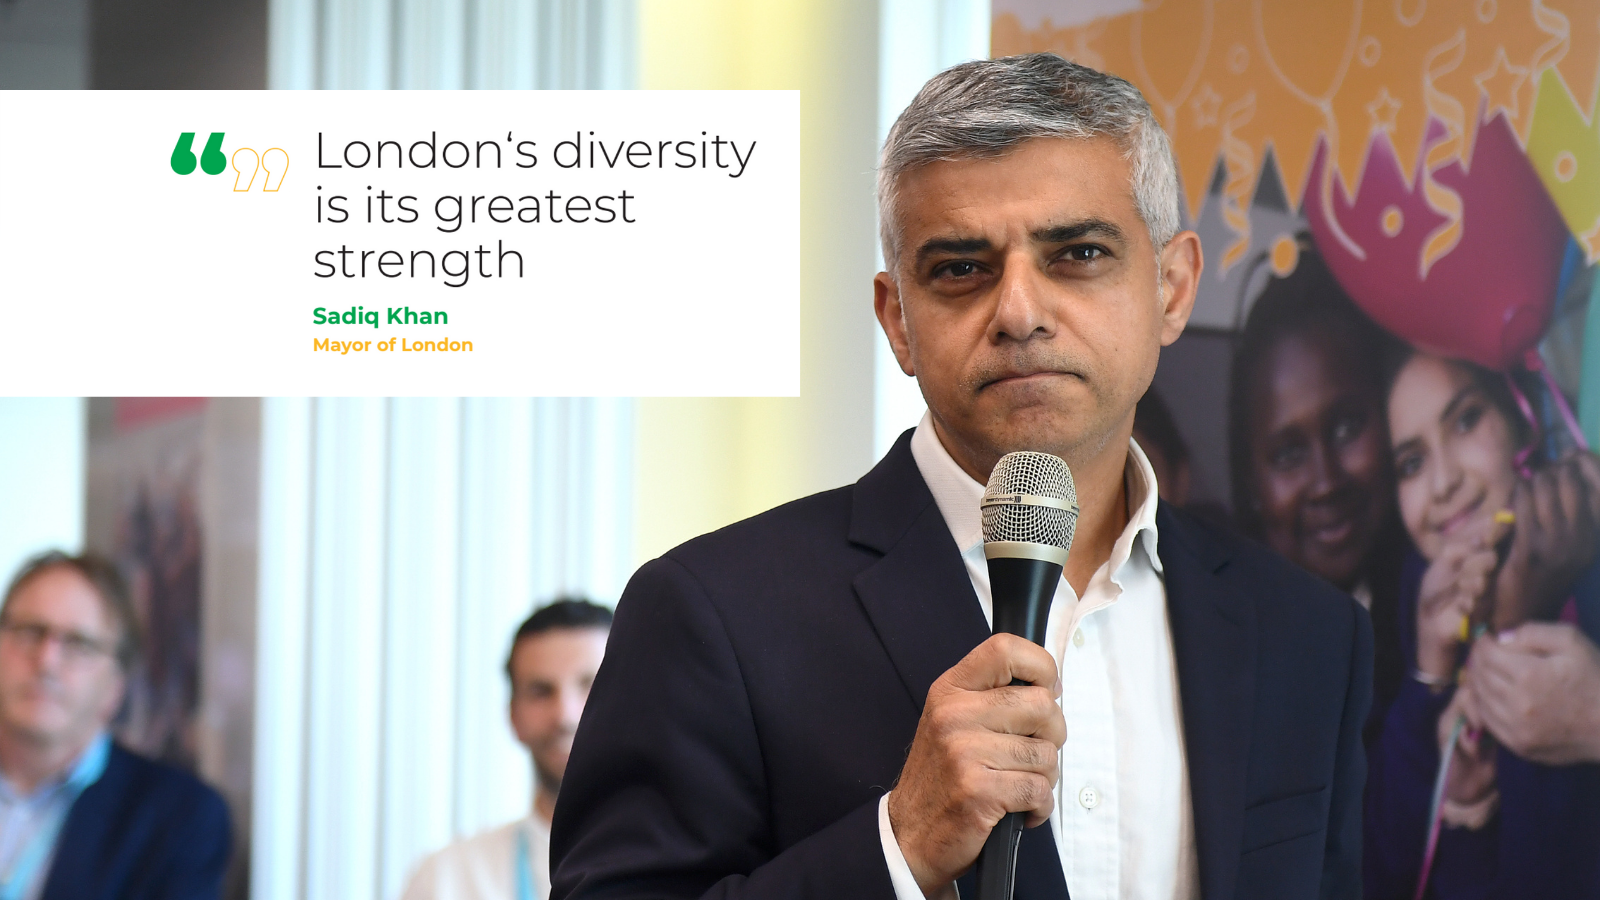 A picture of Sadiq Khan, Mayor of London. A quote reads: "London's diversity is its greatest strength."